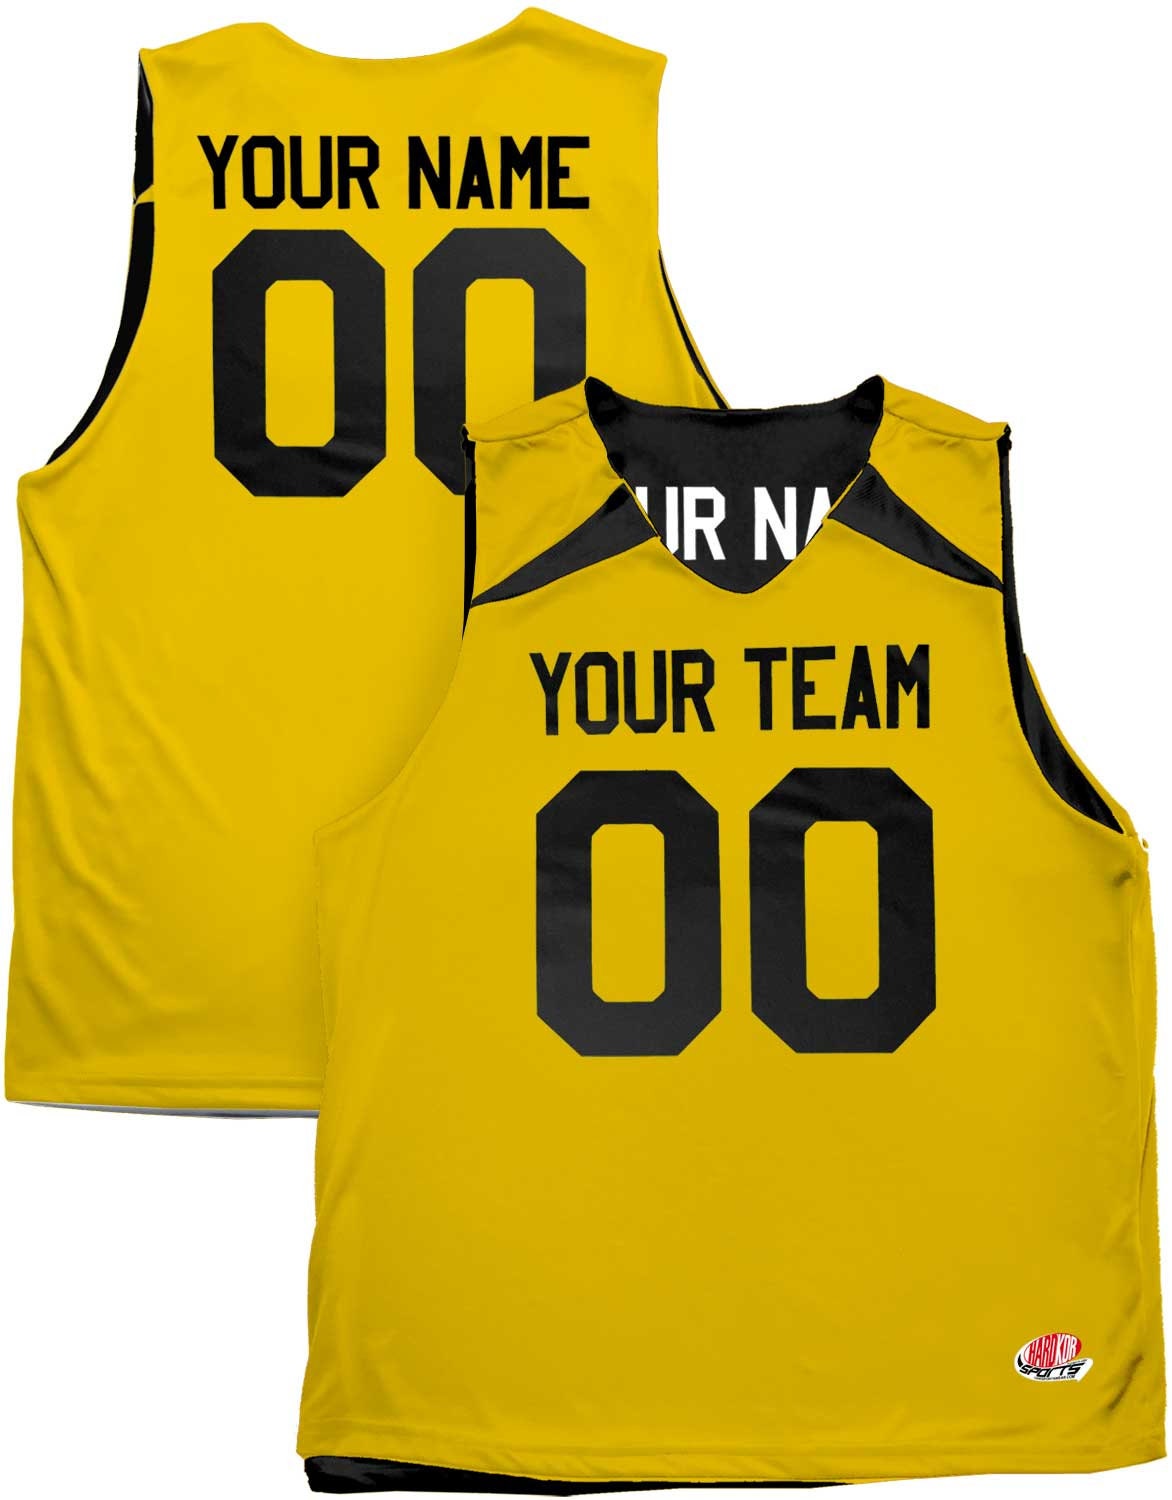  Economy Reversible Custom Basketball Jersey with Names and  Numbers on Both Sides : Clothing, Shoes & Jewelry